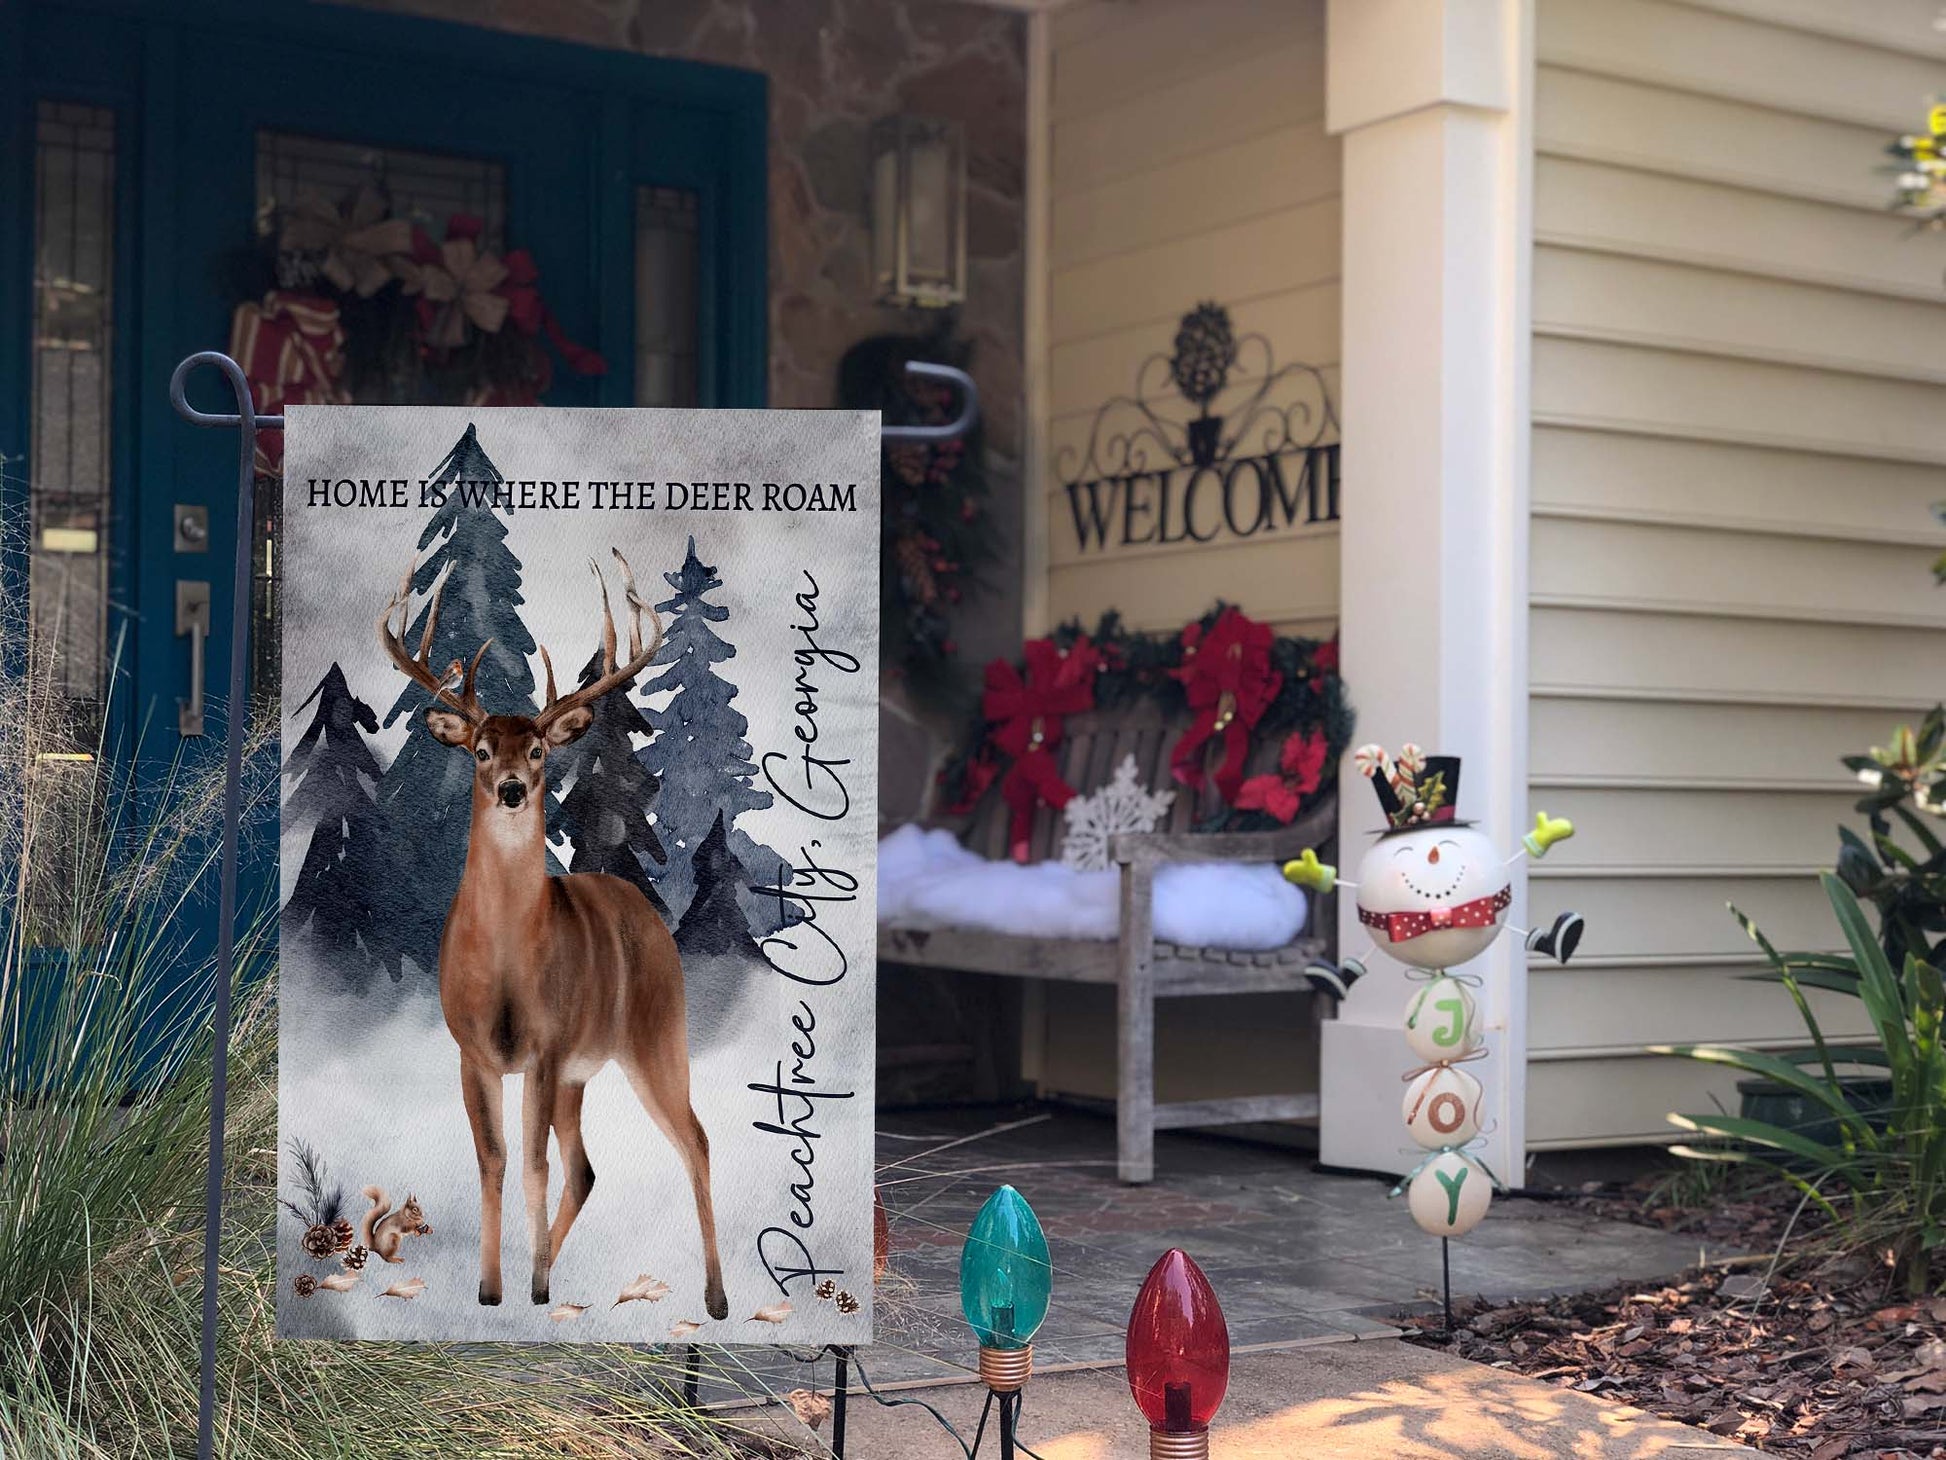 Garden Flag featuring Regal whitetail buck in a winter pine forest garden flag, personalized with your City and State in Winter Setting | imperfect by design co